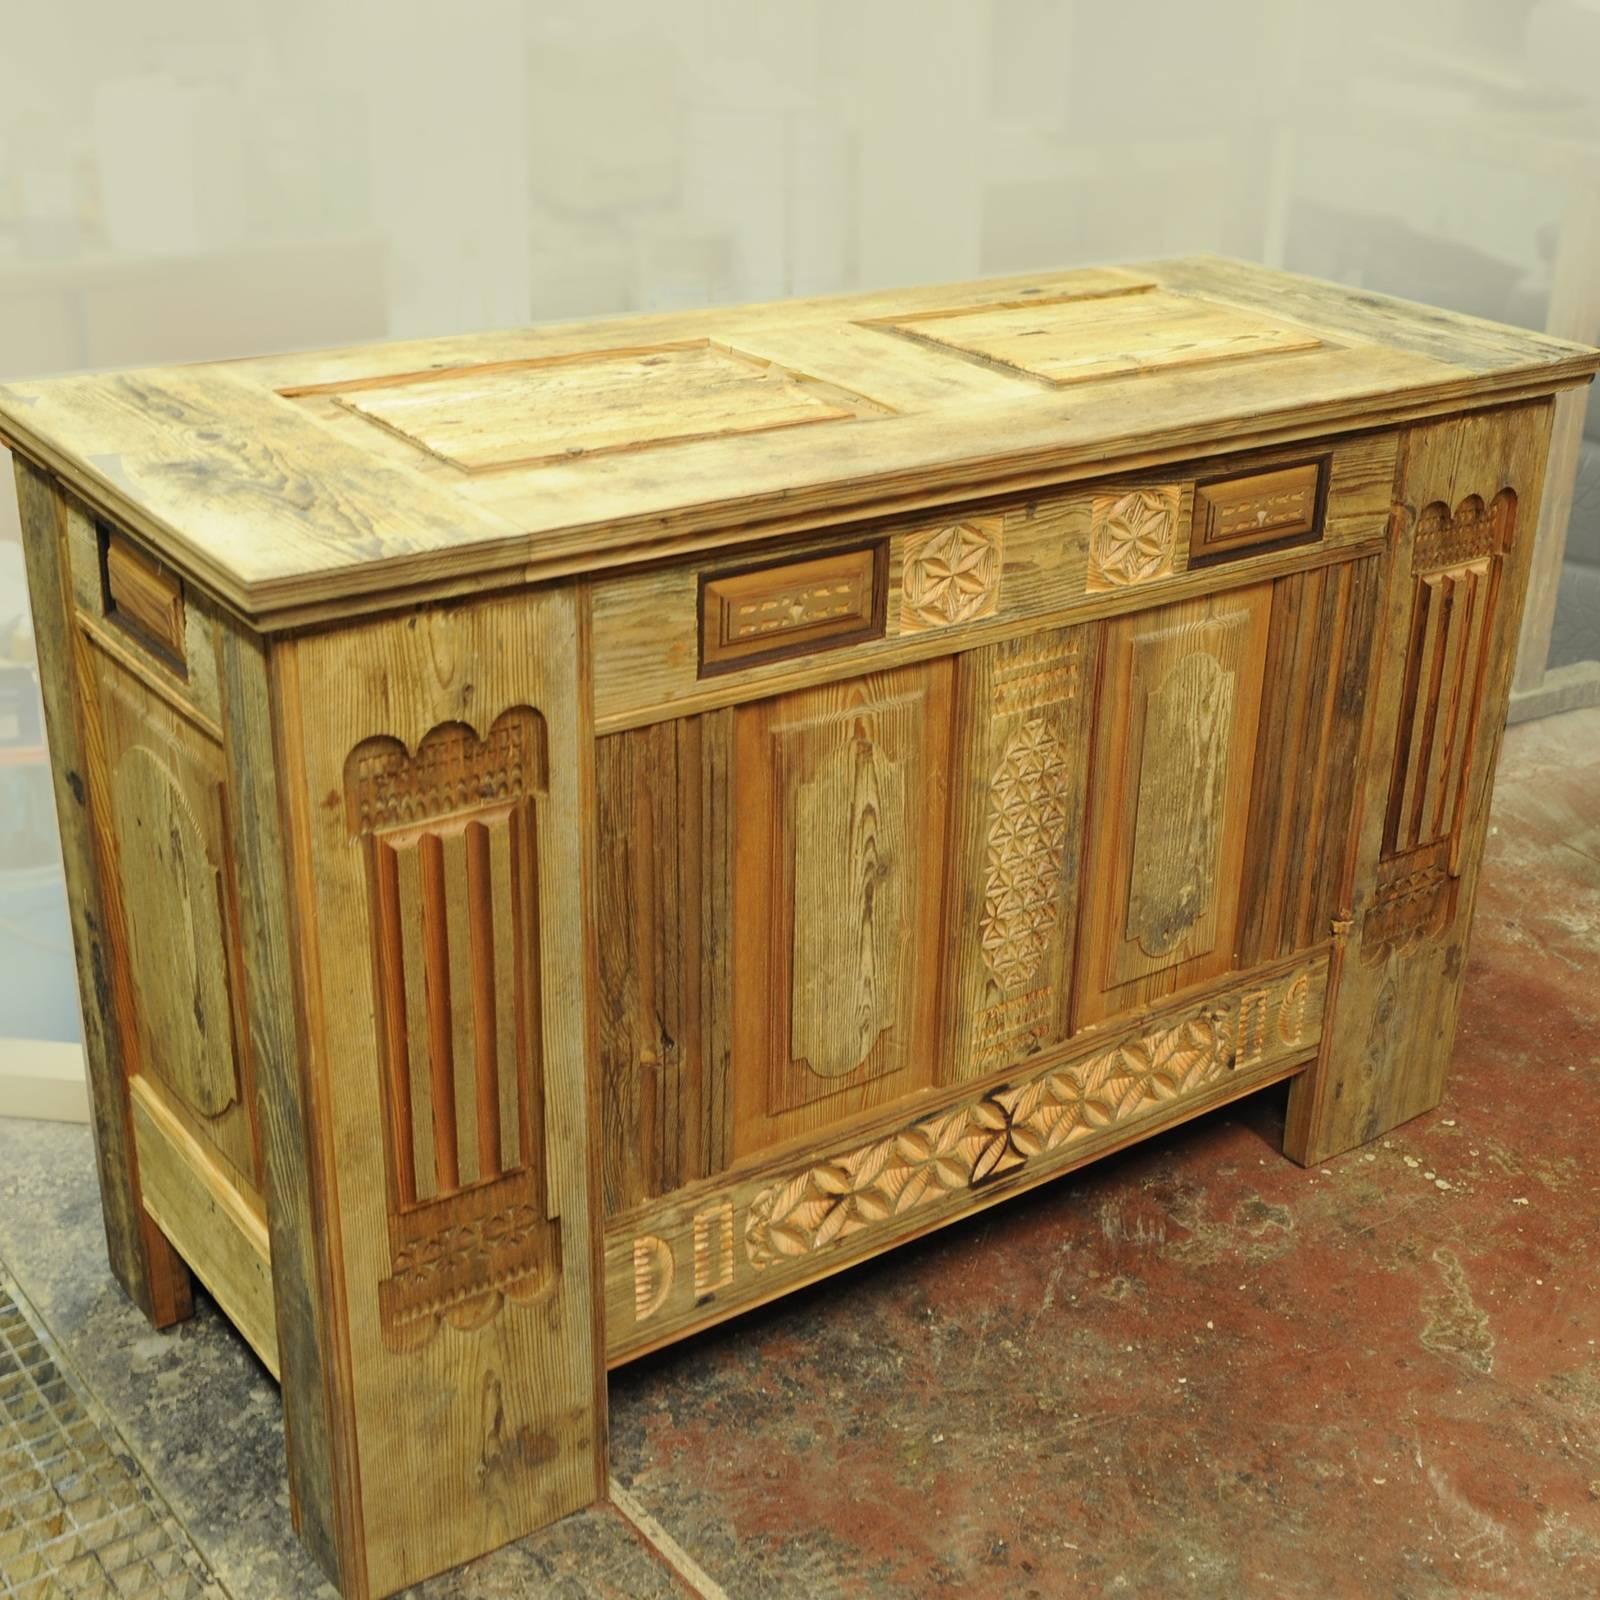 A stunning addition to a modern or rustic decor, this chest is a precious example of Gothic style originated in the French region of Elsass, at the border with Germany. Handmade using 400-600 years old larch, this piece boasts striking traditional